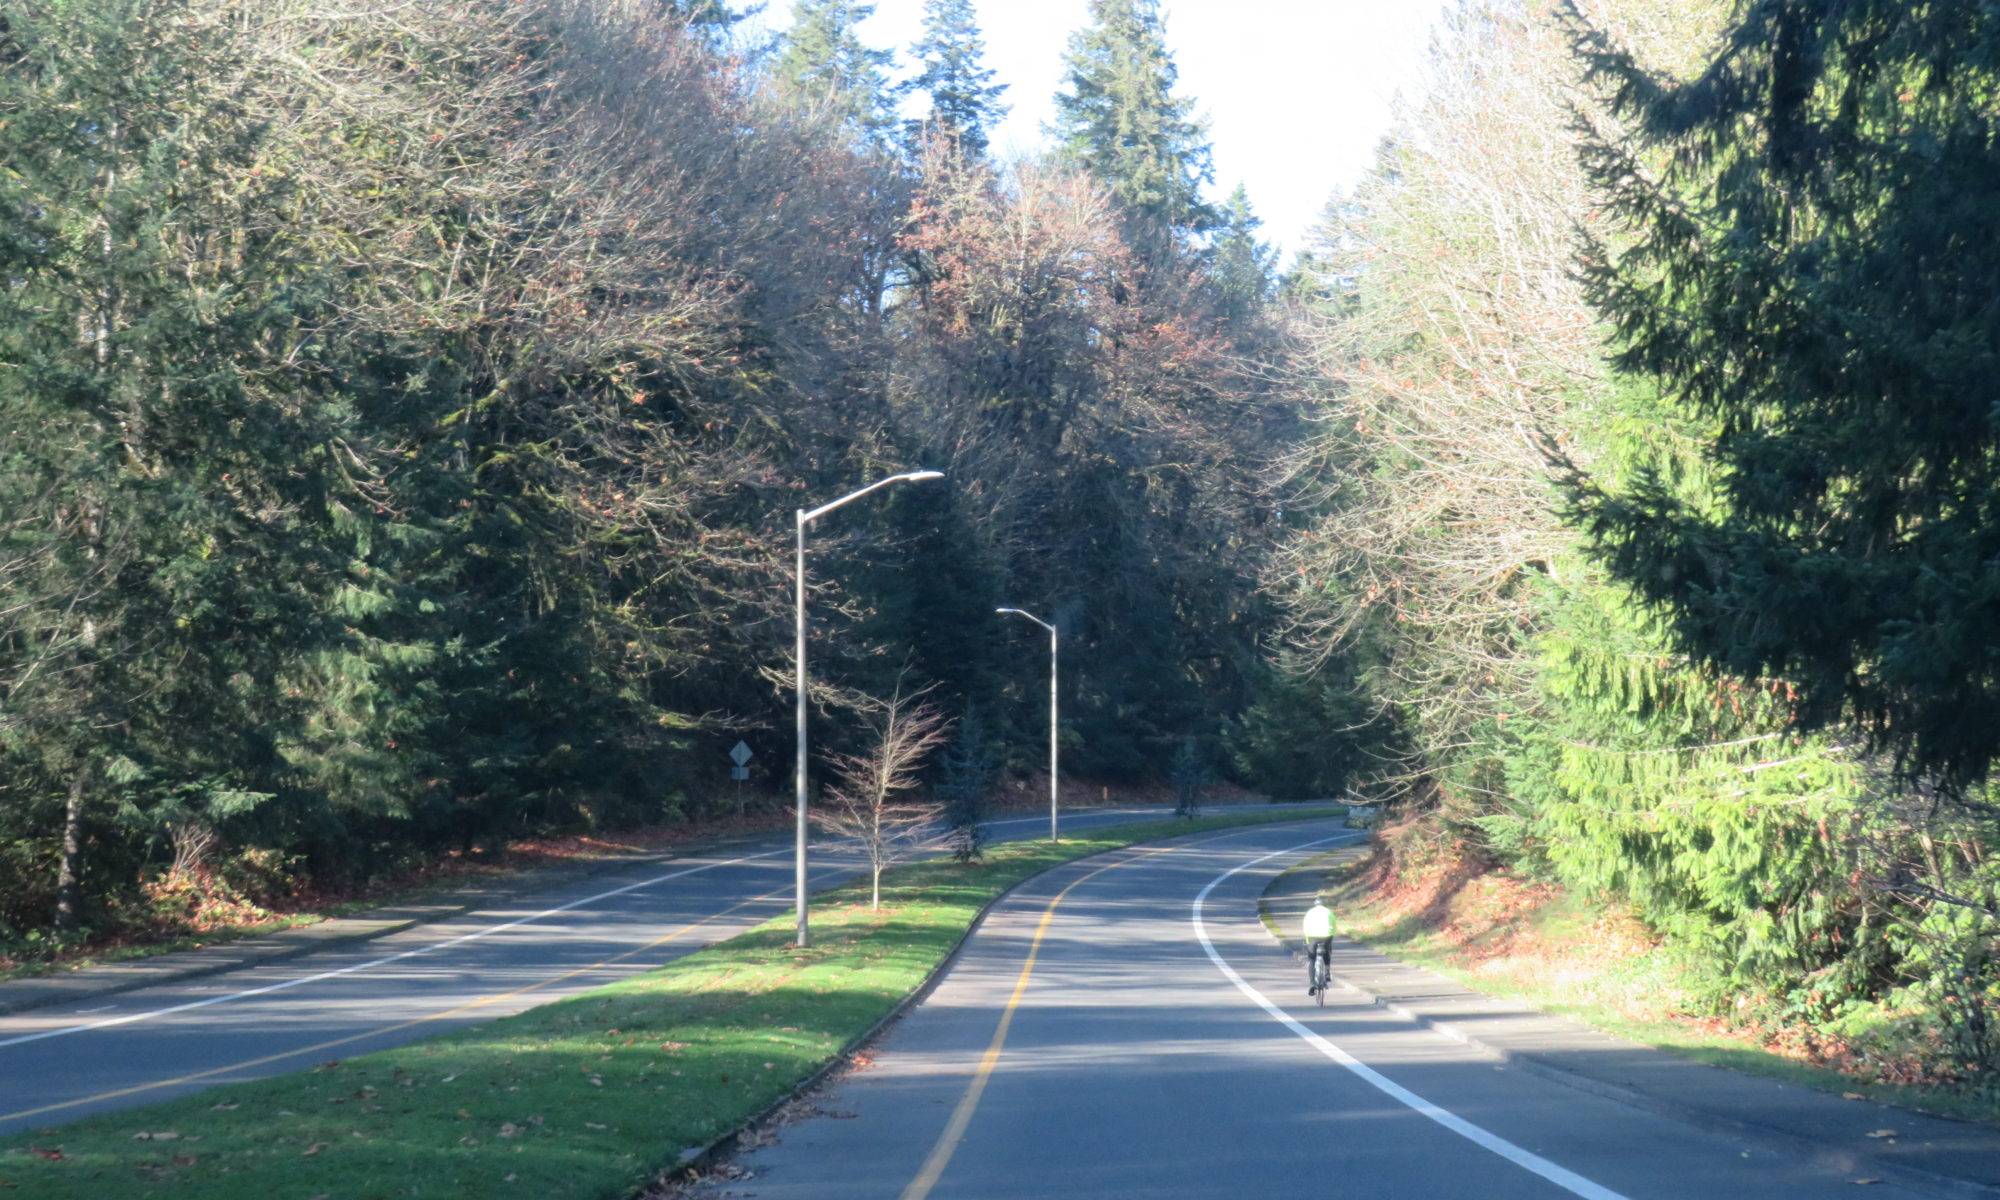 Picture of East Bay Drive with trees looming over both sides of the road and a bicyclist in the bike lane.